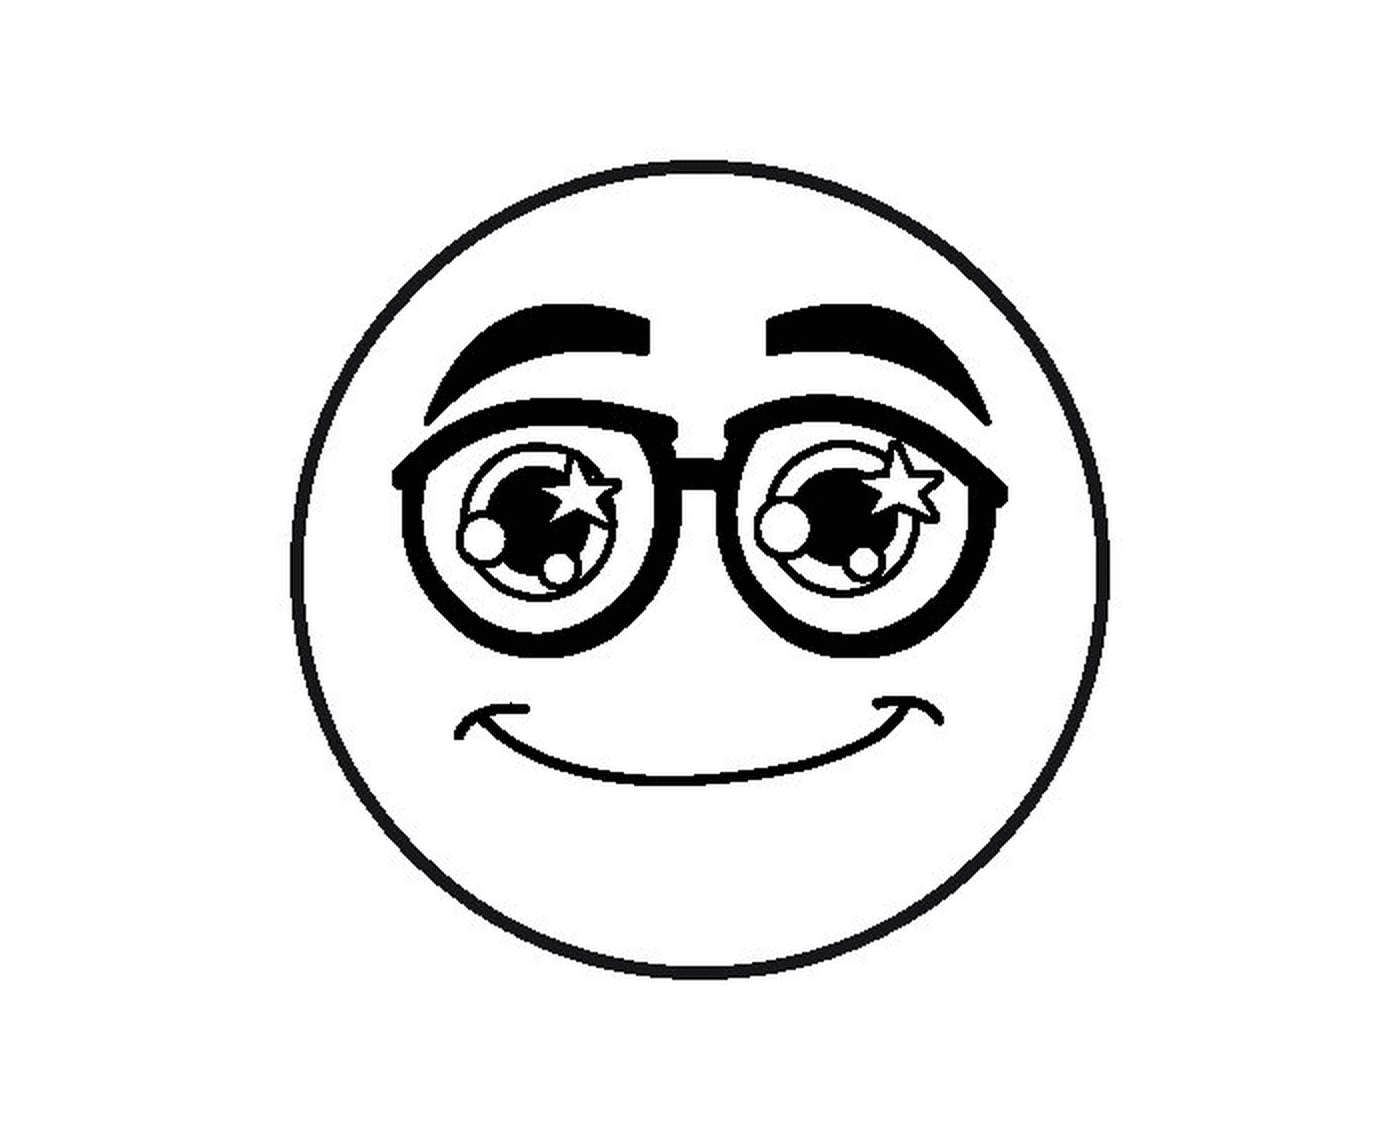  A smiling face with glasses 